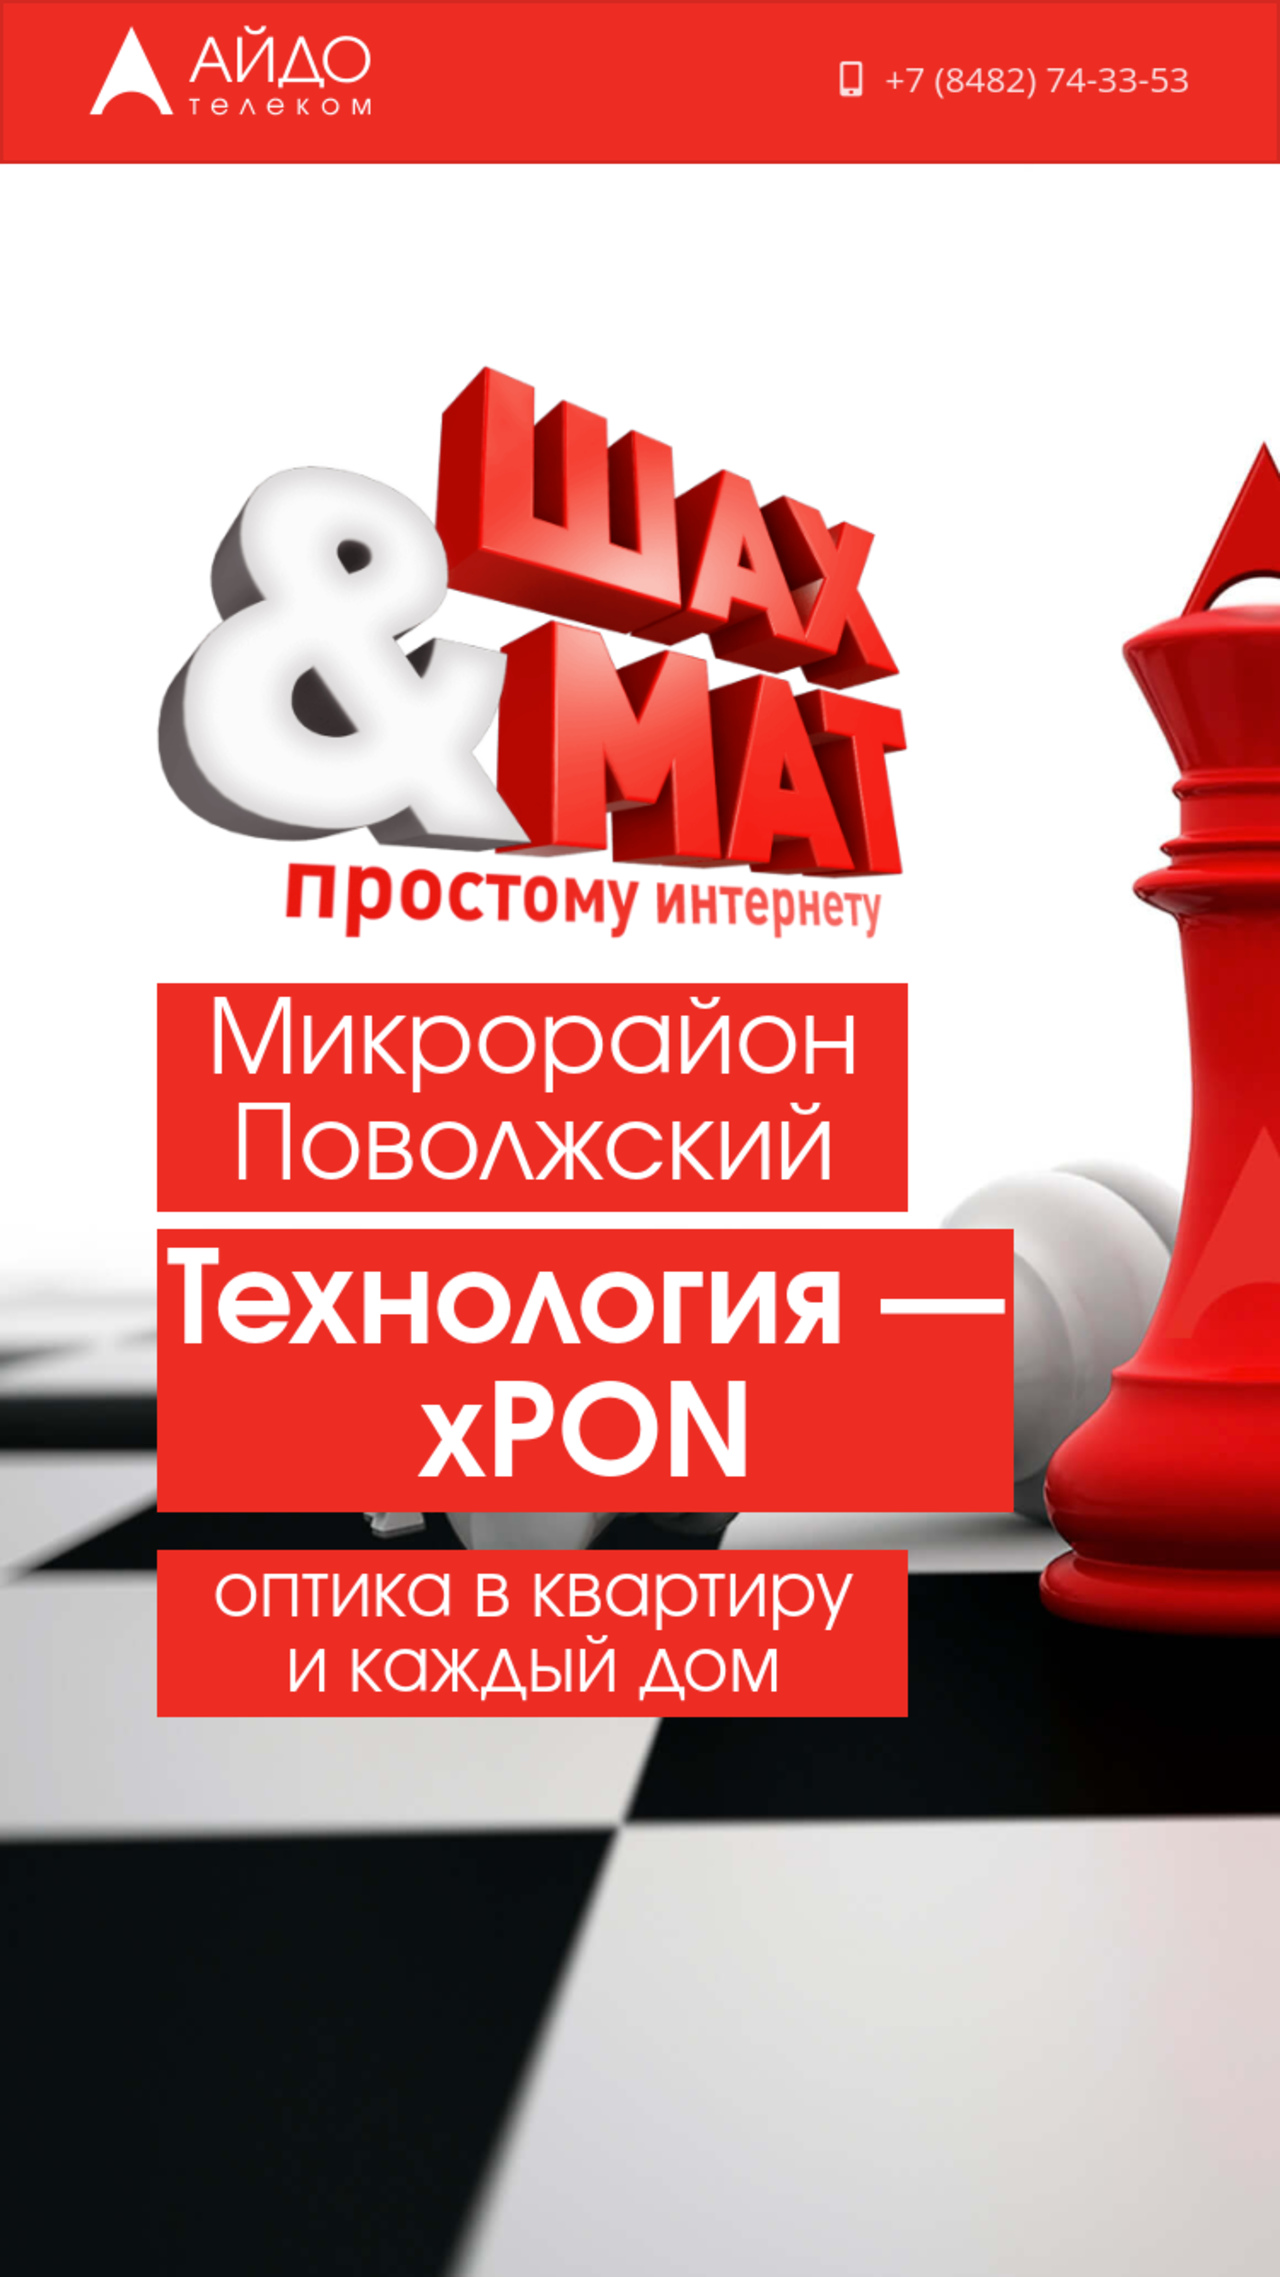 Aido Telecom - Promotional website to support advertising campaign for Povolzhsky district - Slide 5